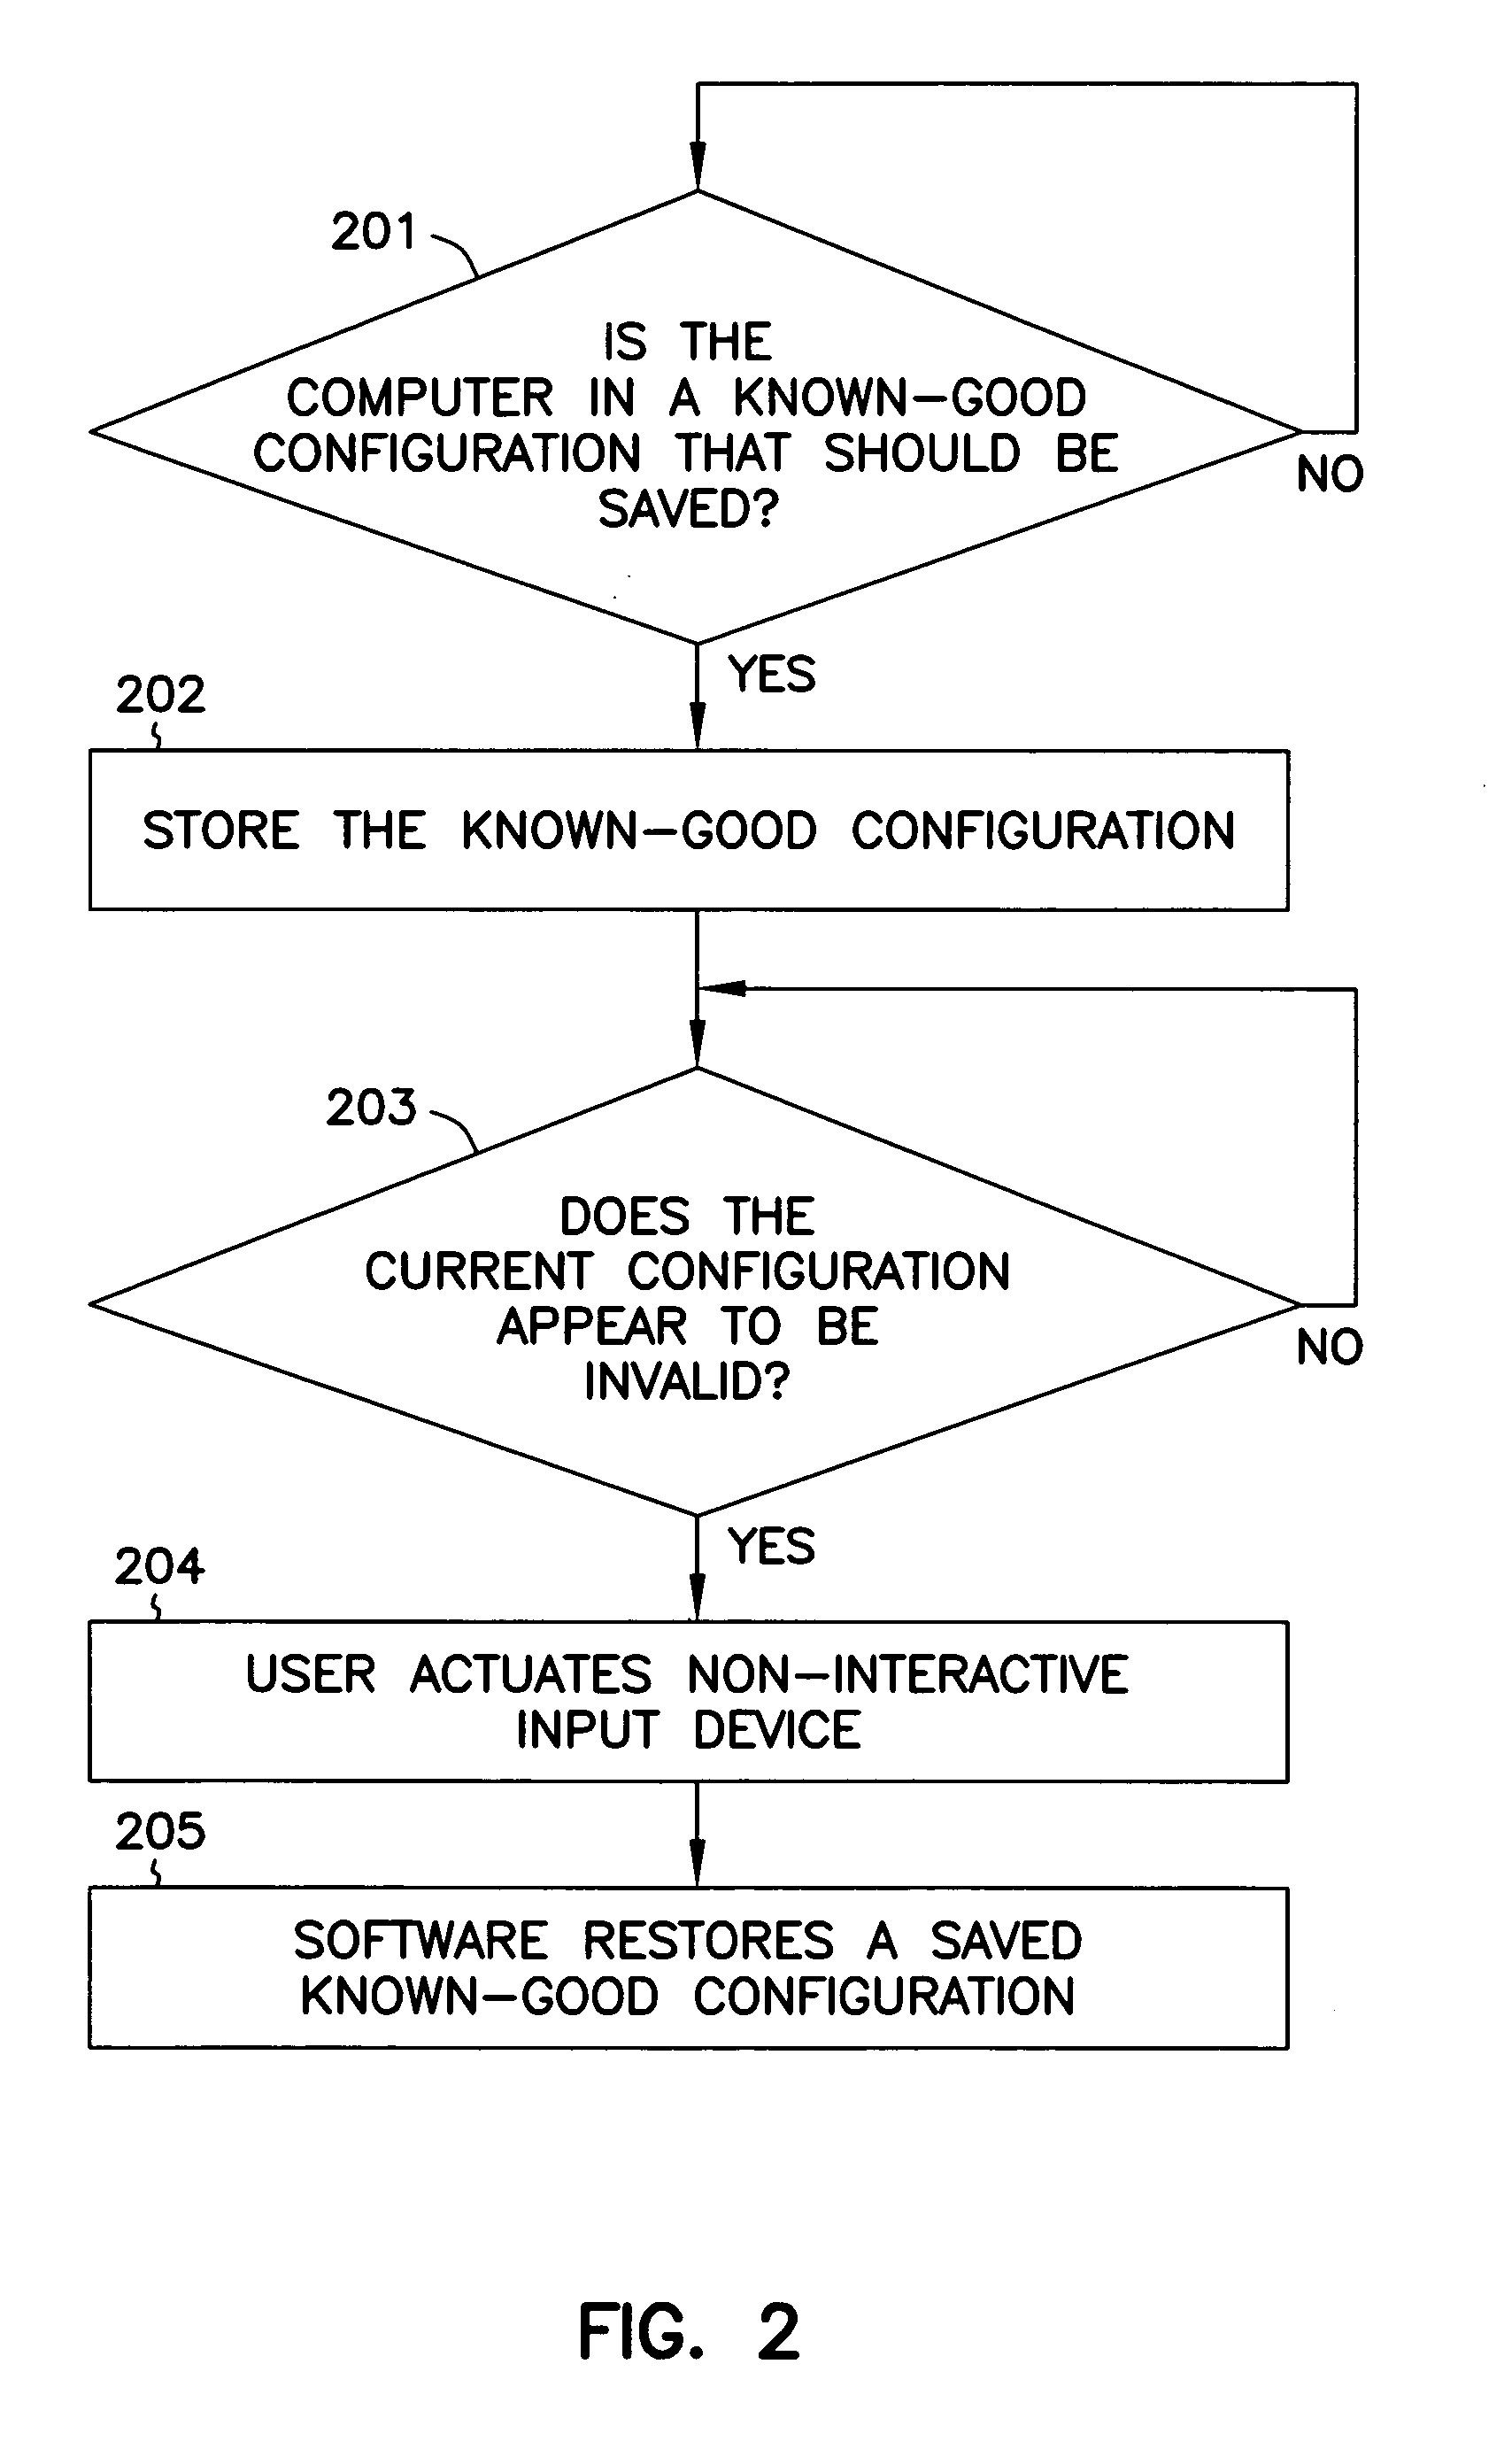 System and method for re-storing stored known-good computer configuration via a non-interactive user input device without re-booting the system